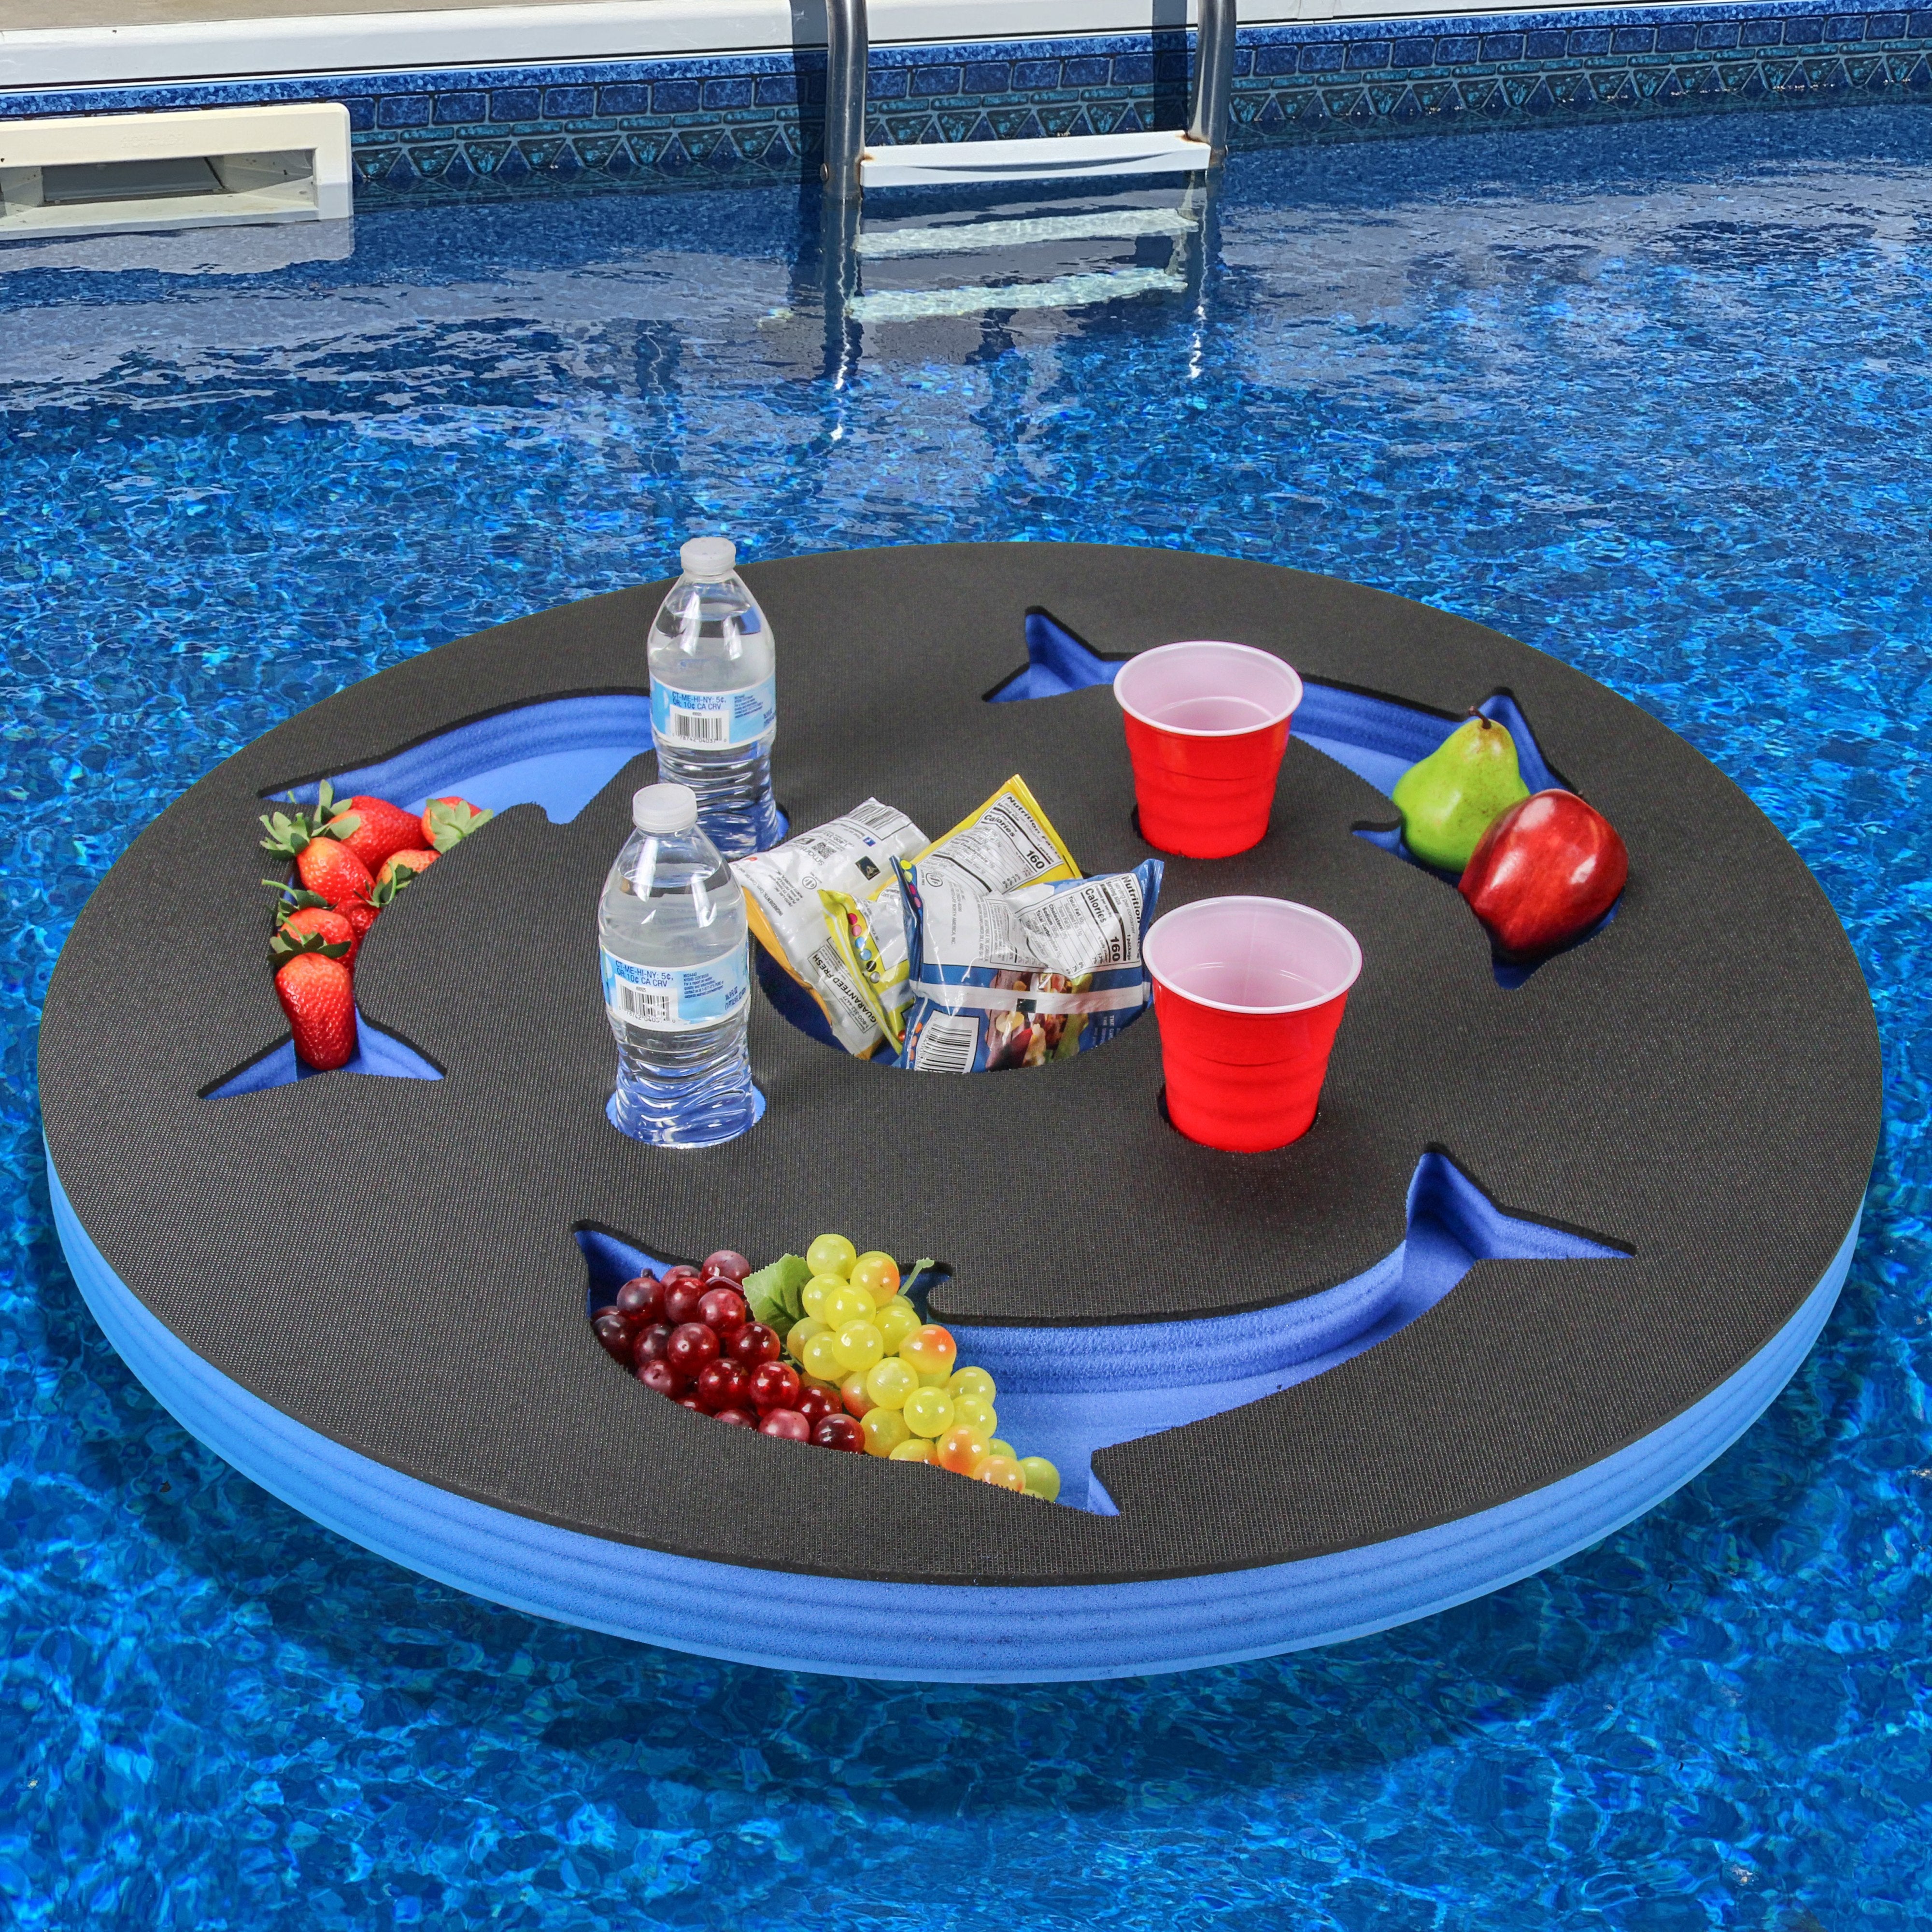 Dolphin Shaped Drink Holder Refreshment Bar Table Tray Pool Beach Party Float Lounge Durable Foam 7 Compartment UV Resistant Cup Holders 35.6 Inches